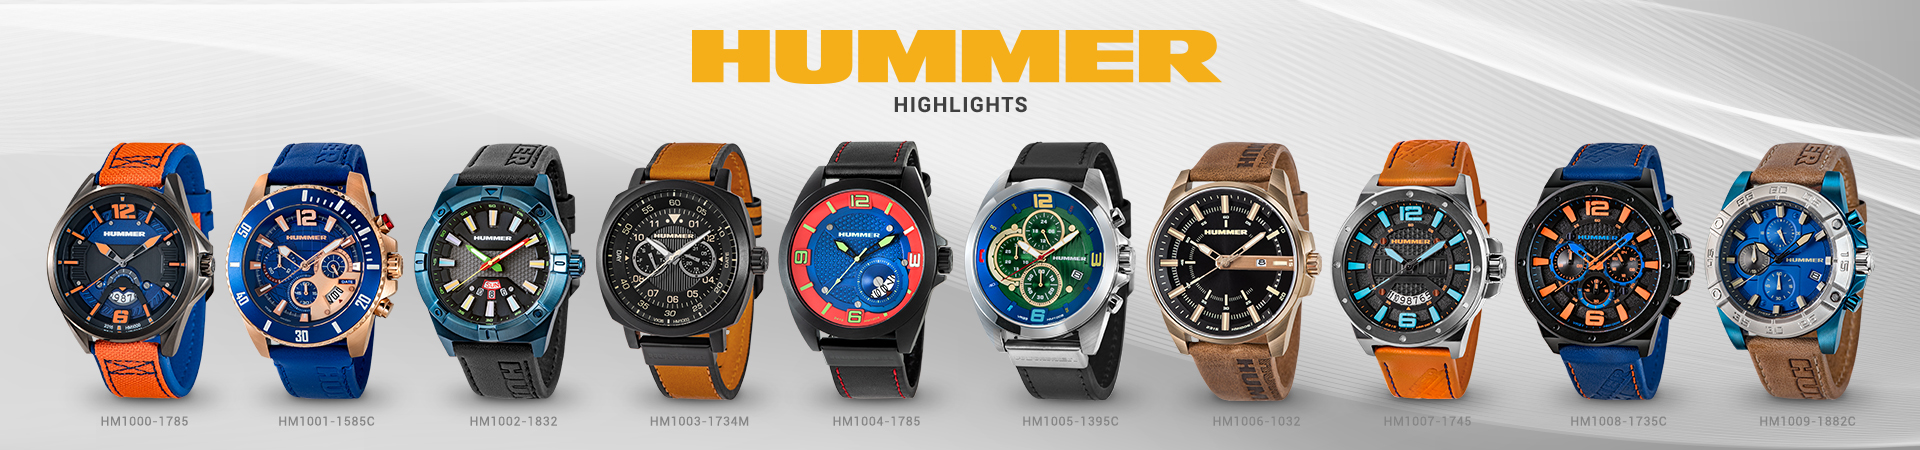 Hummer Timepieces Watches Collections Online Store Solar Time